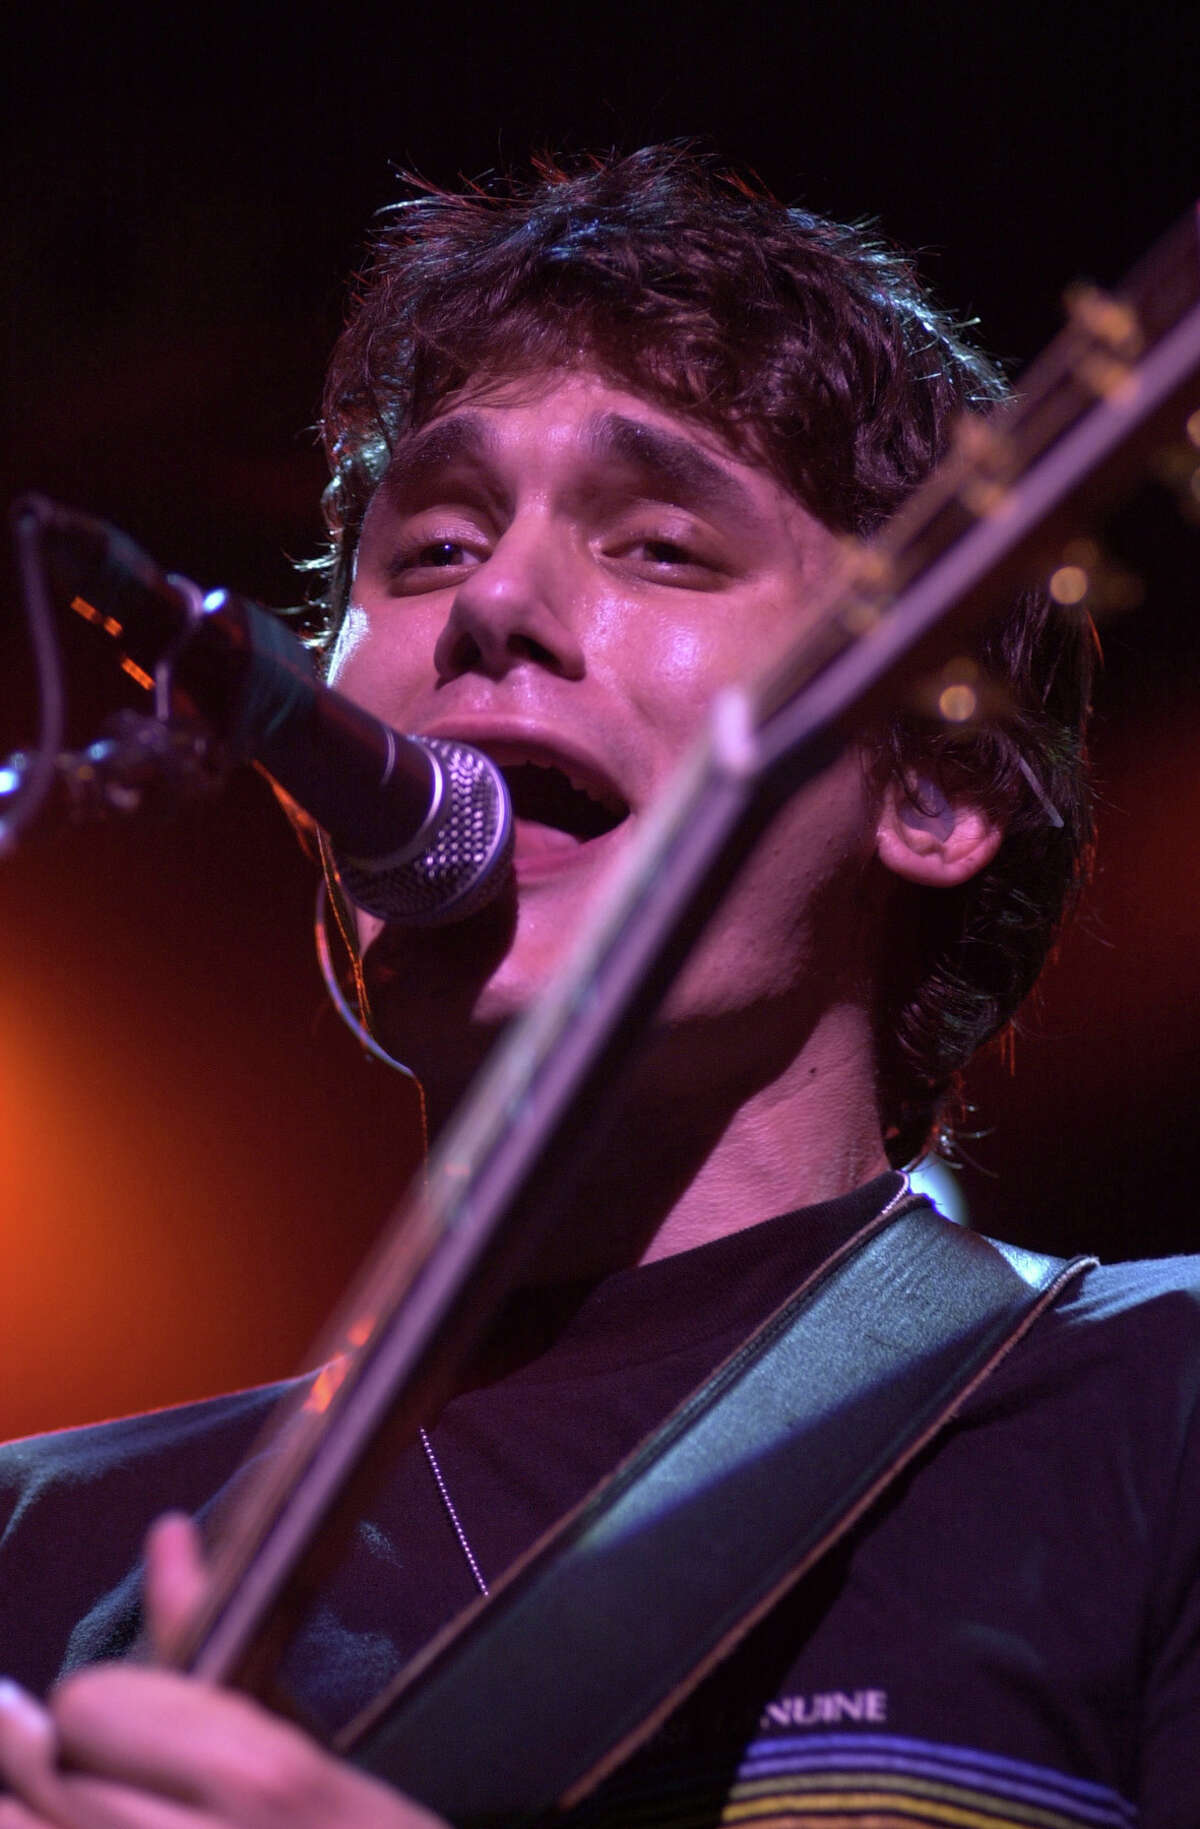 FILE PHOTO - 8/20/03, Pop singer John Mayer performs at the Meadows Music Center in Hartford on Wednesday night. His group headlined, while Counting Crows, and Stew opened the show.